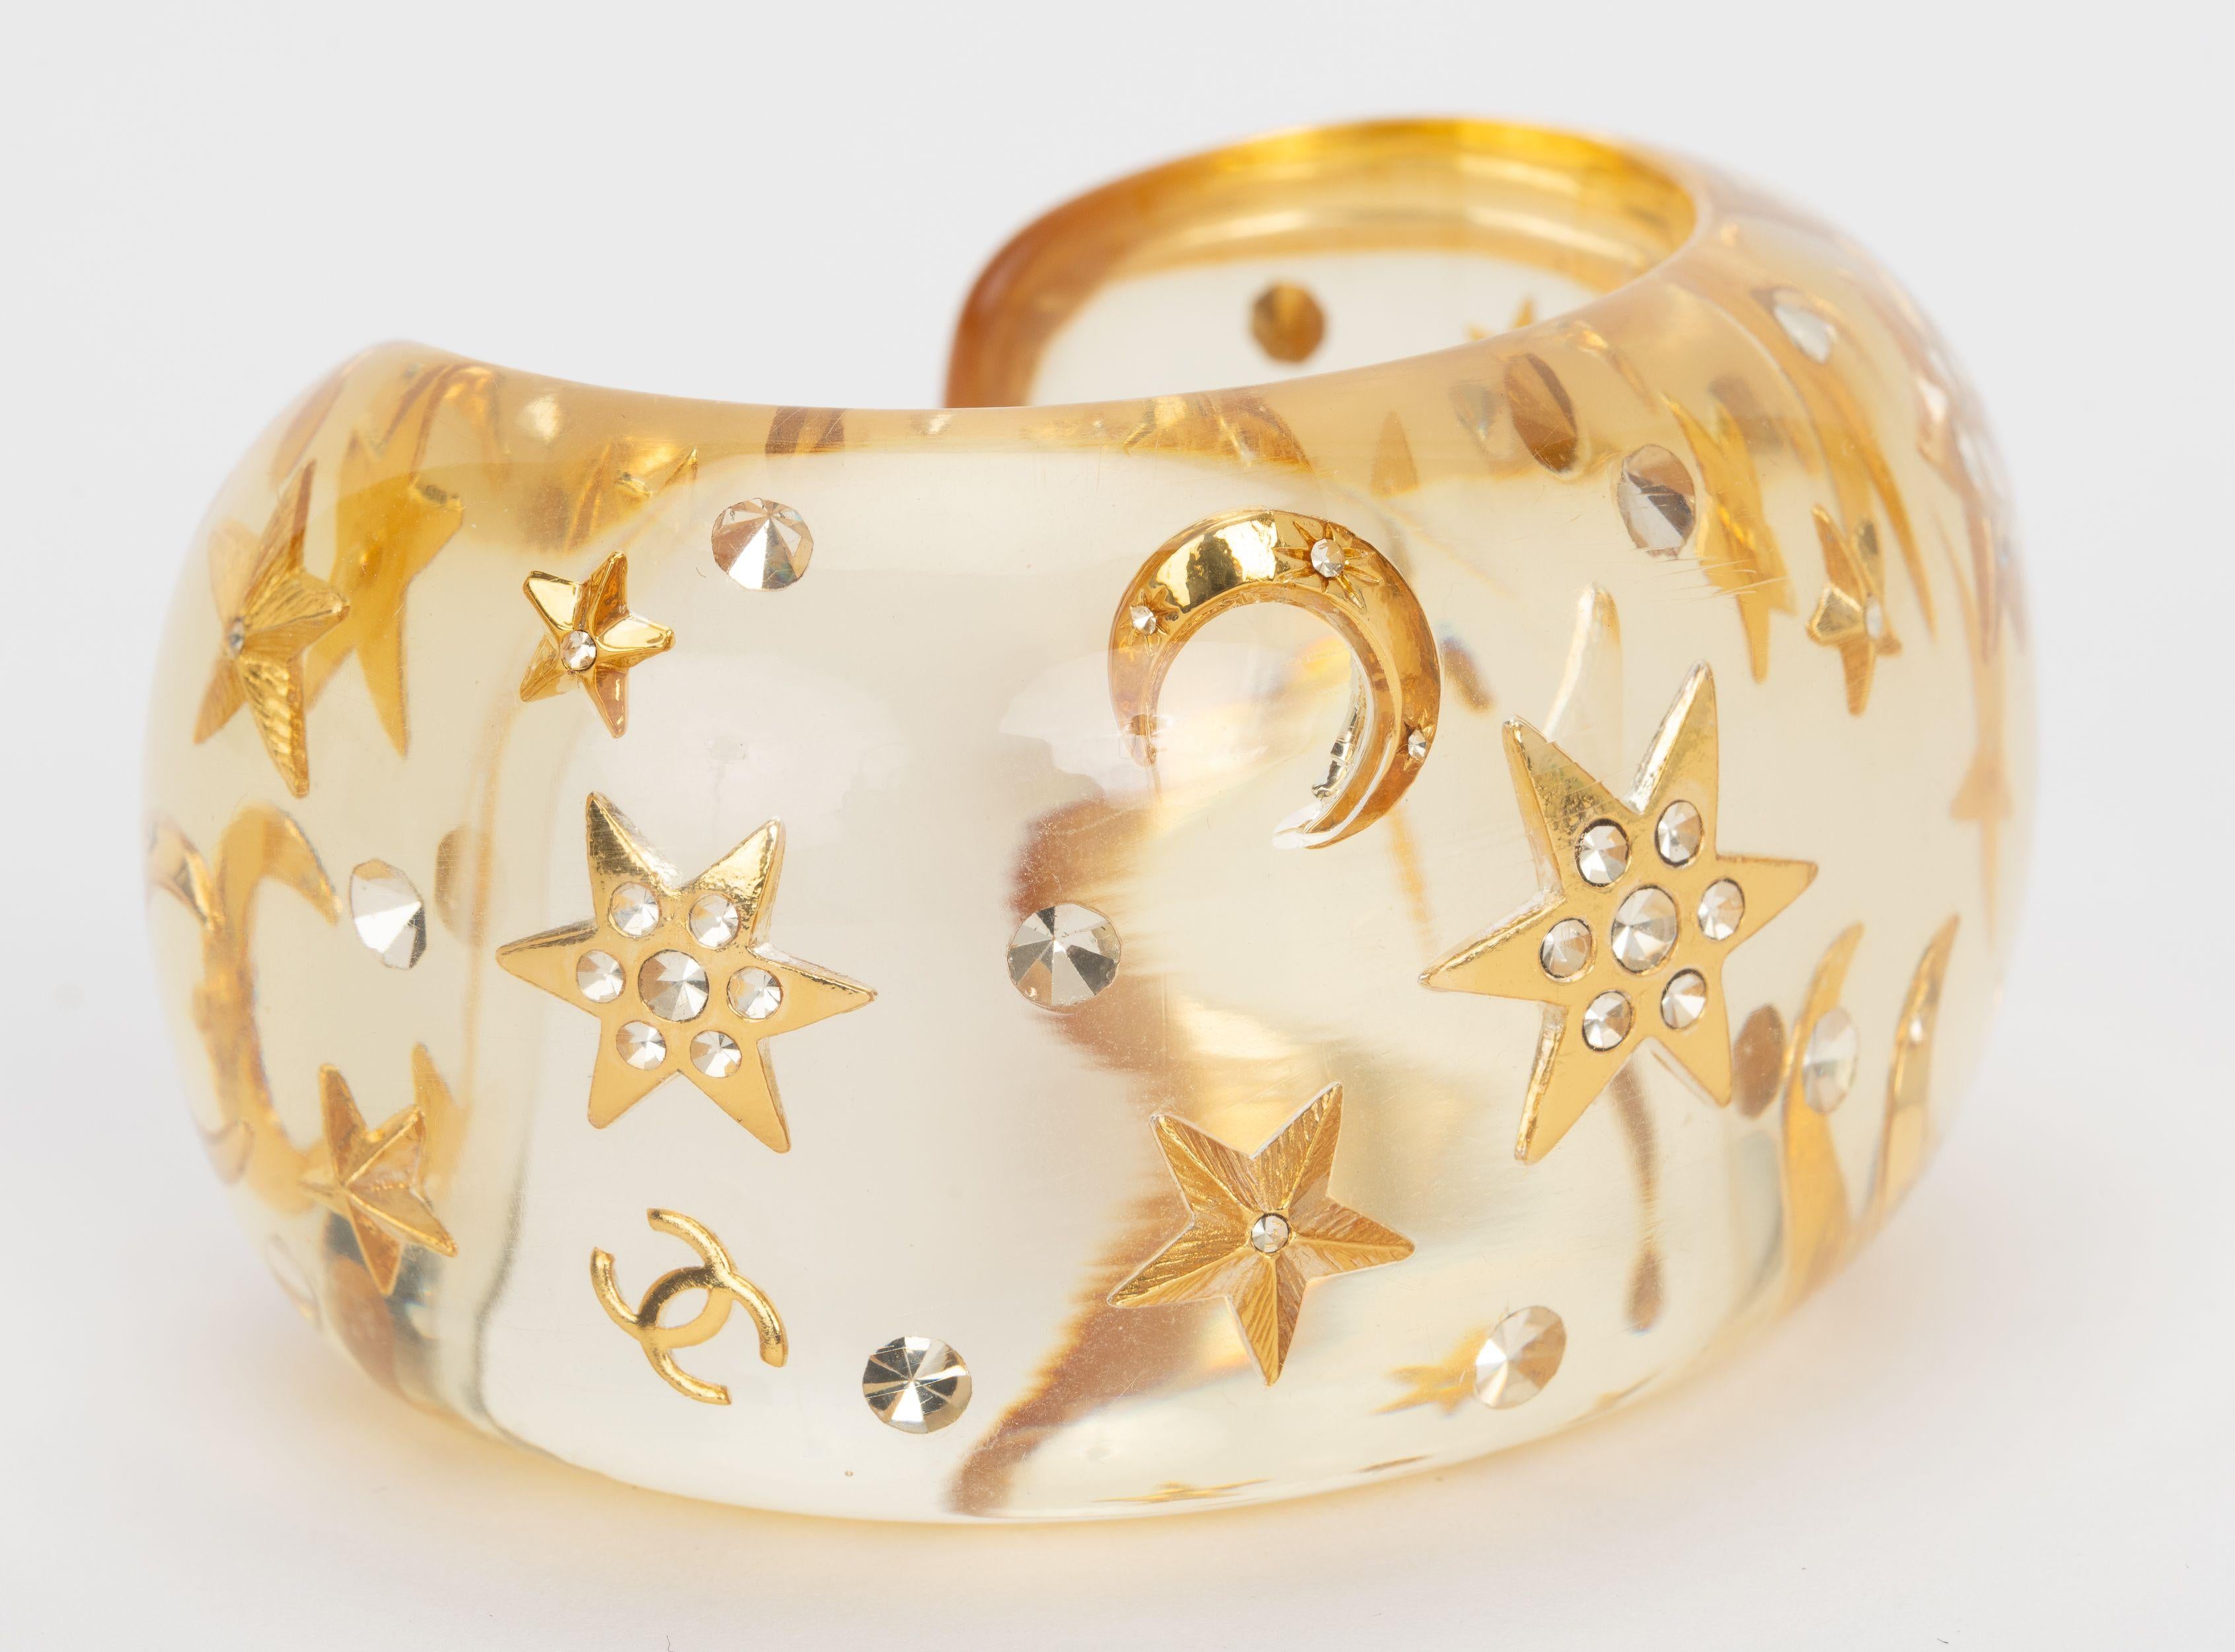 Chanel rare and collectible inlay Moon and Star Bracelet Cuff. Features clear resin CC crystal rhinestone on bangle. Autumn 95 collection. .
Opening 1.25”.
Size small, comes with original box.